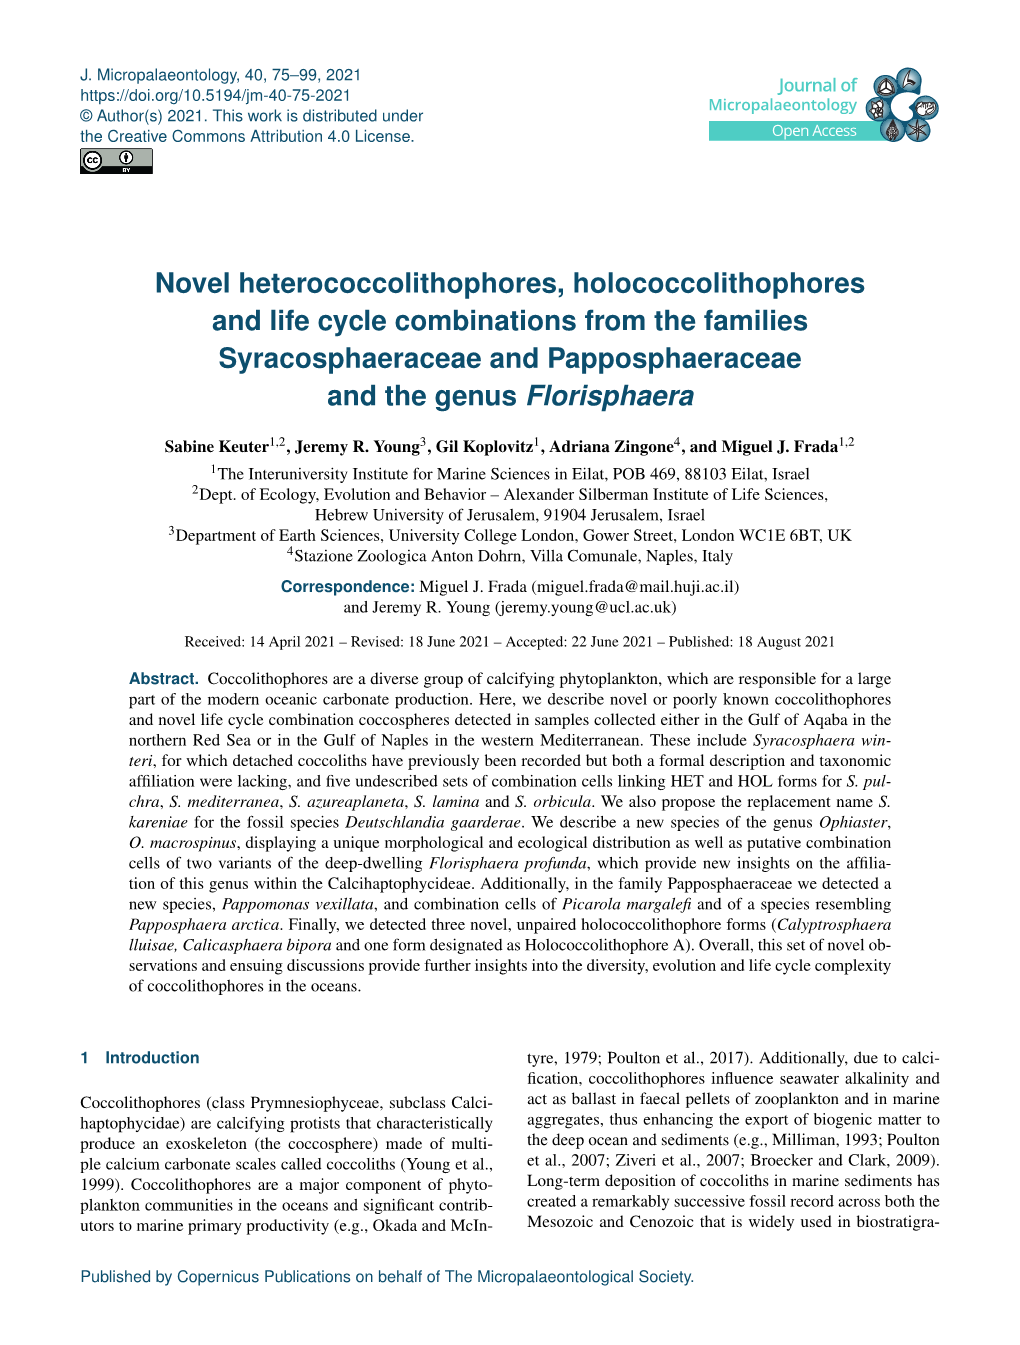 Novel Heterococcolithophores, Holococcolithophores and Life Cycle Combinations from the Families Syracosphaeraceae and Papposphaeraceae and the Genus Florisphaera